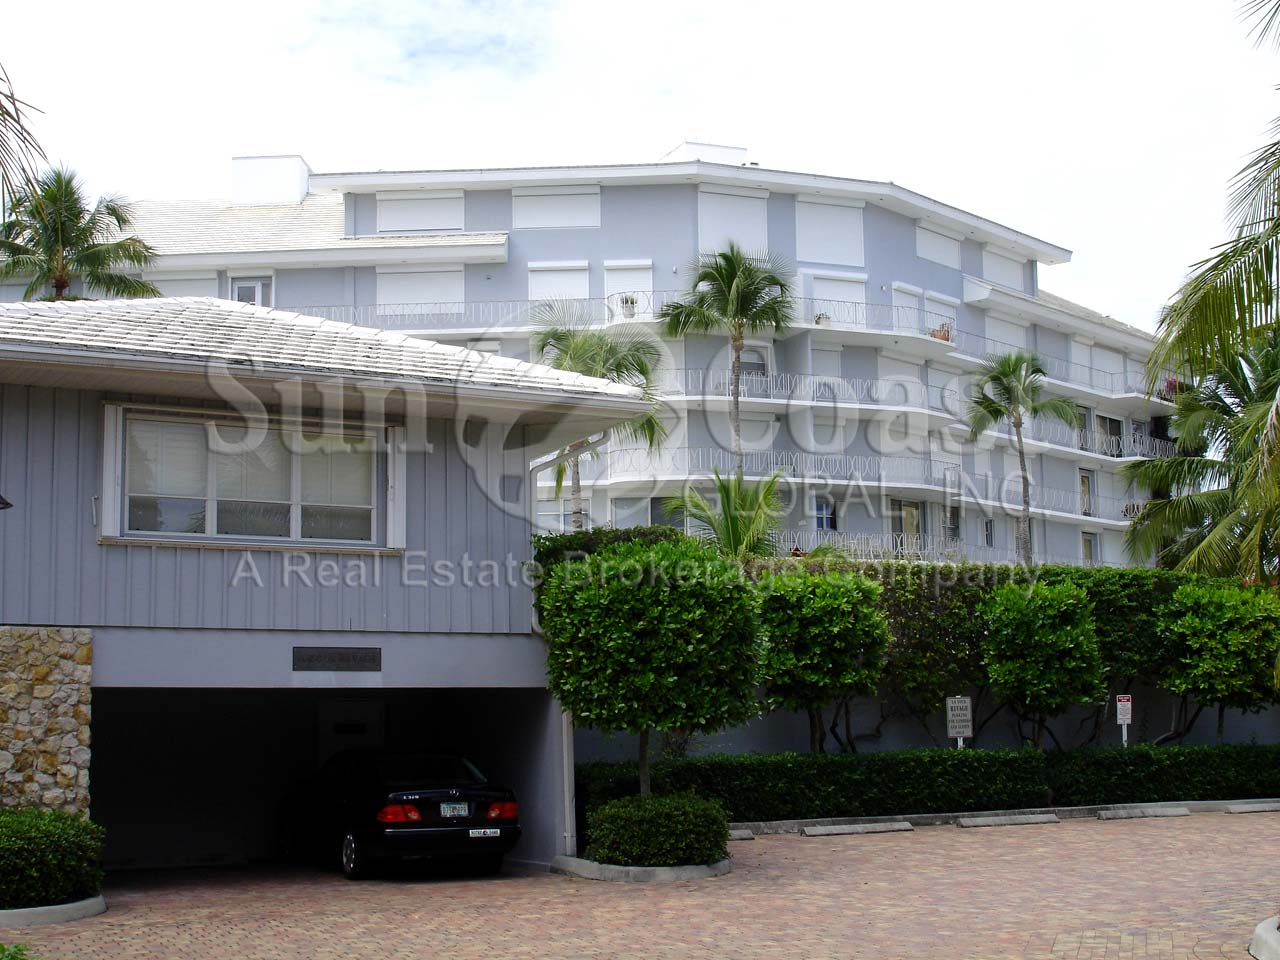 La Tour Rivage Condominiums with Detached Covered Parking